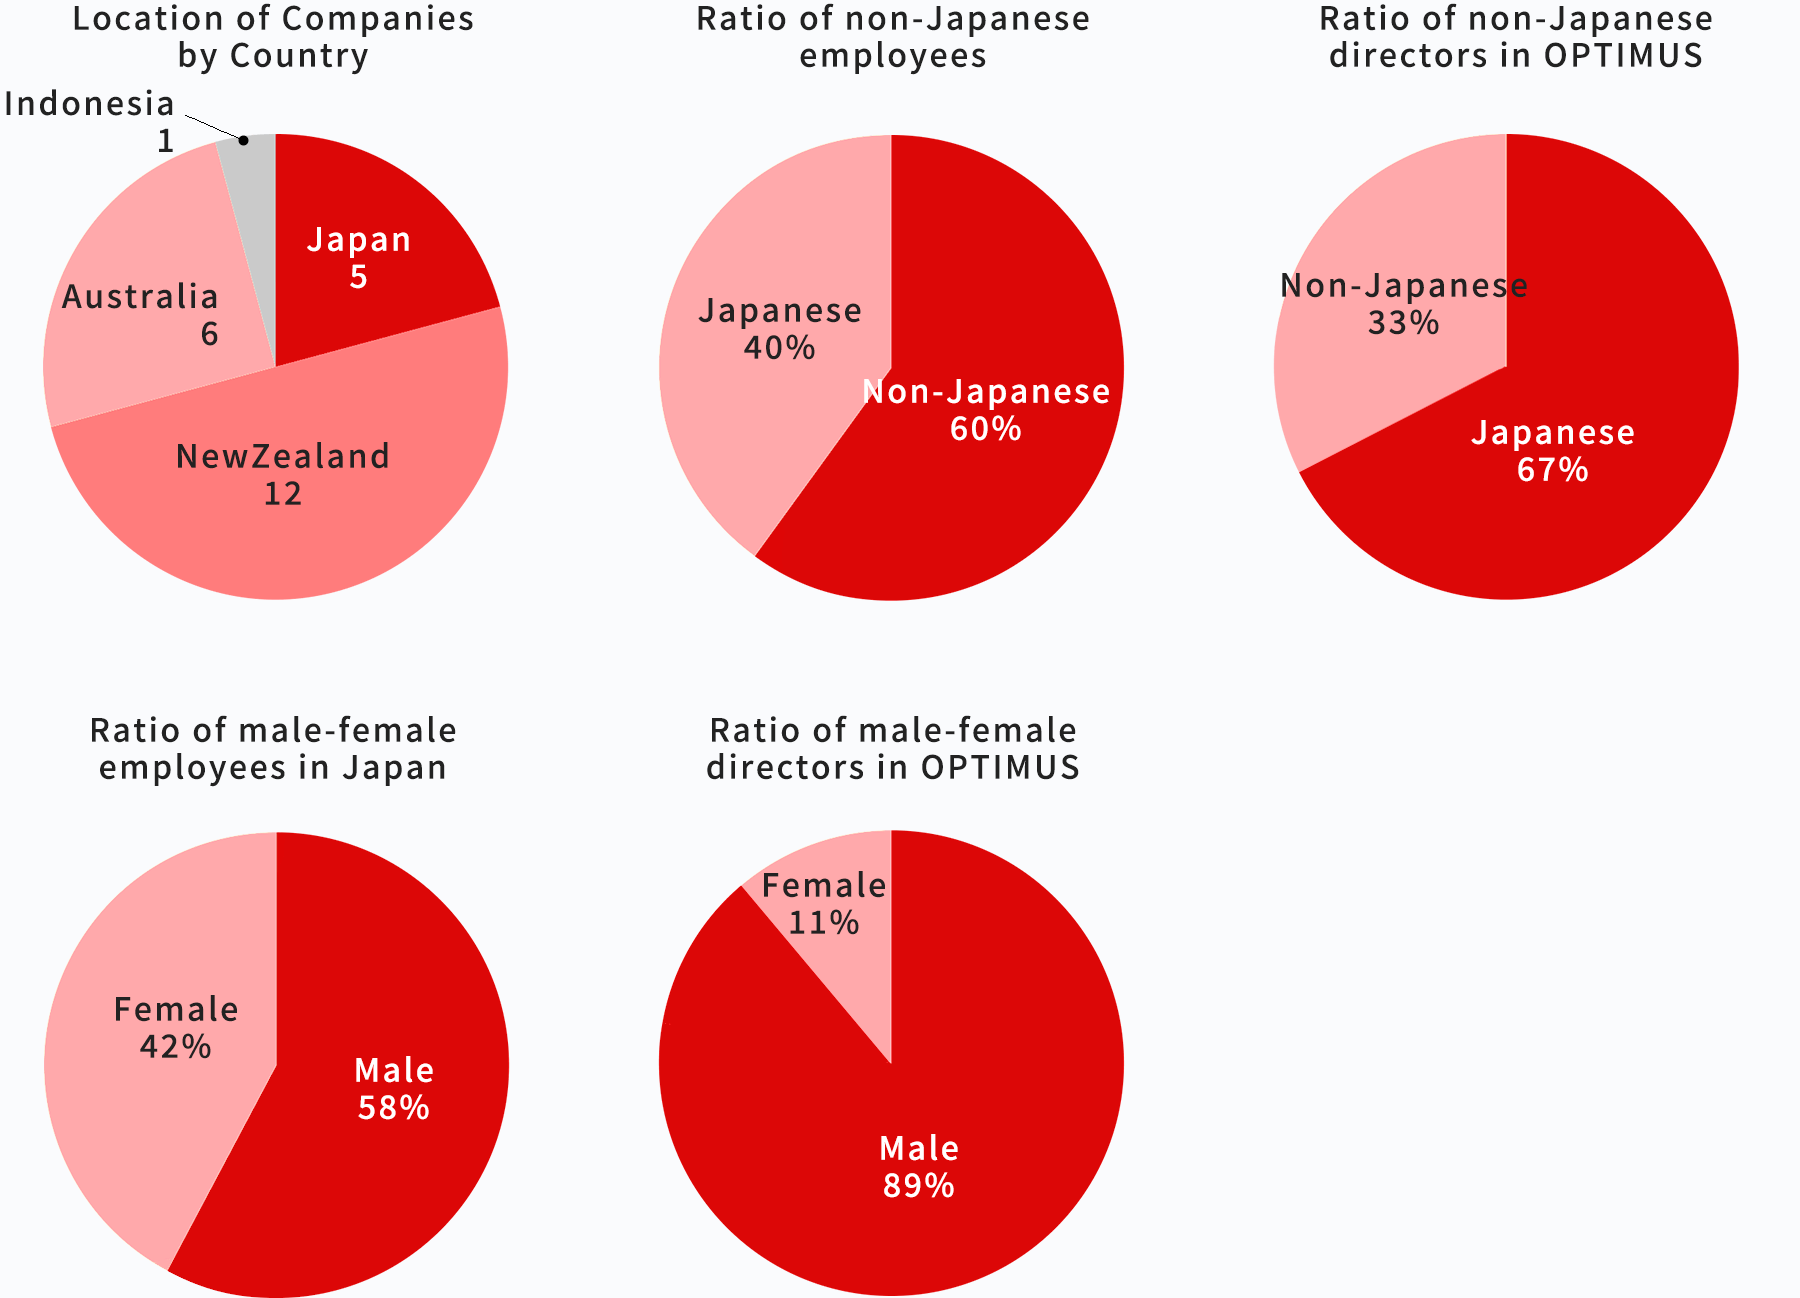 Location of Companies by Country  Ratio of non-Japanese employees  Ratio of non-Japanesedirectors in OPTIMUS  Ratio of male-female employees in Japan  Ratio of male-female directors in OPTIMUS